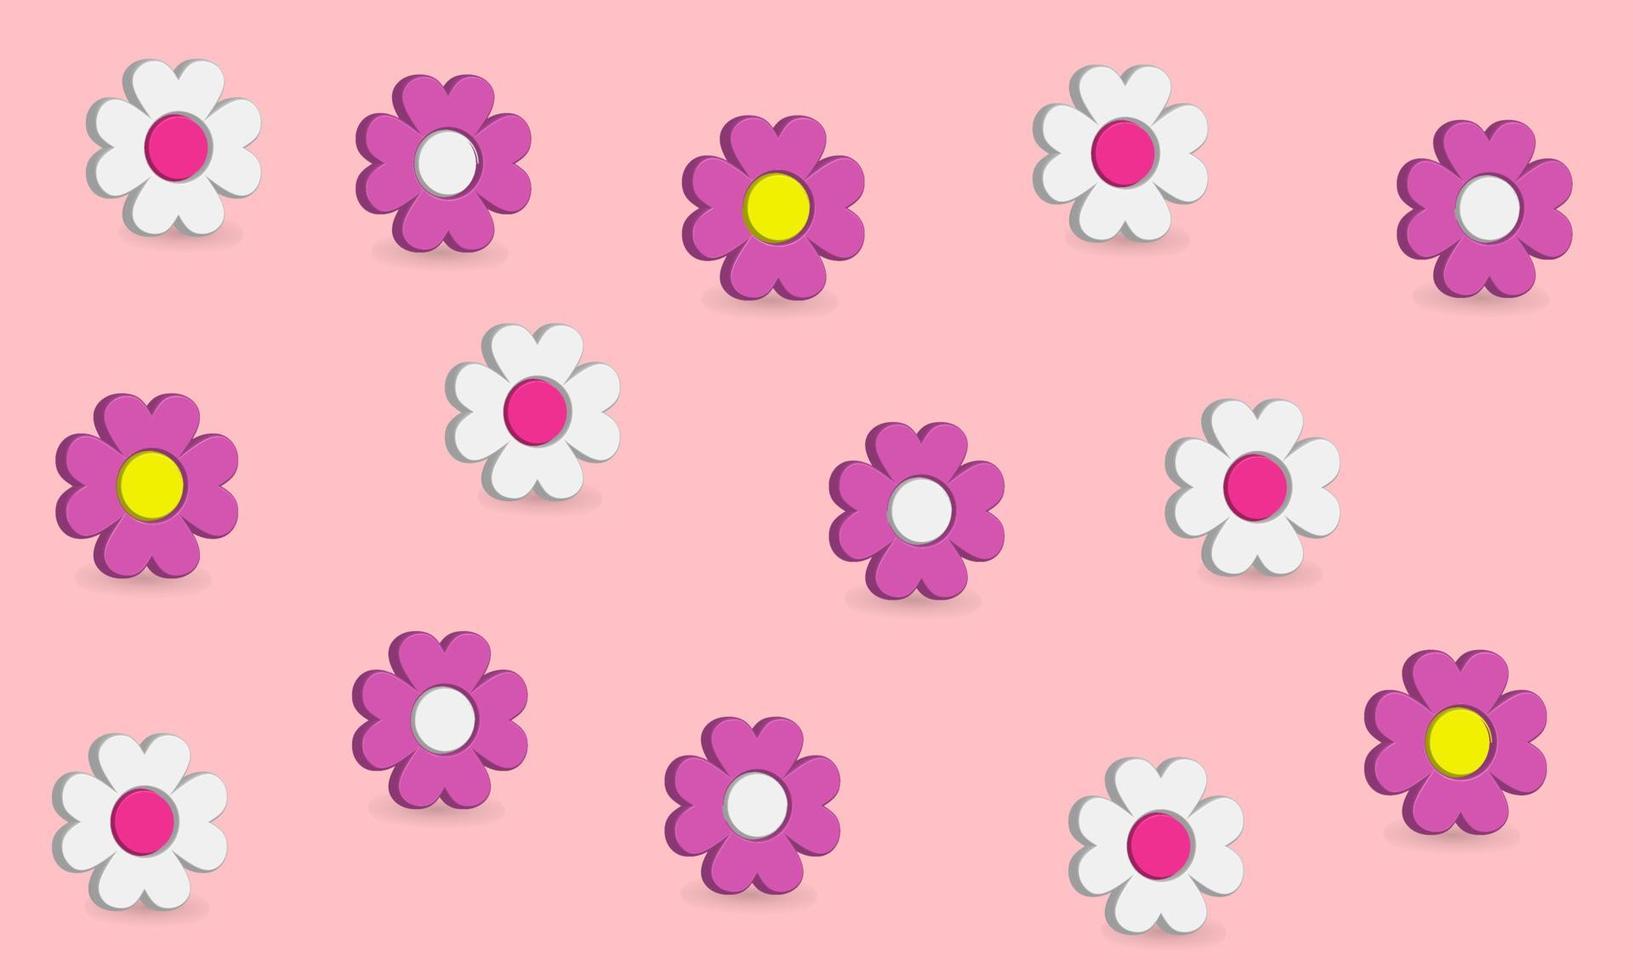 3D flower icon background pattern with purple, pink and white colors. Nature theme best for your decoration property images vector